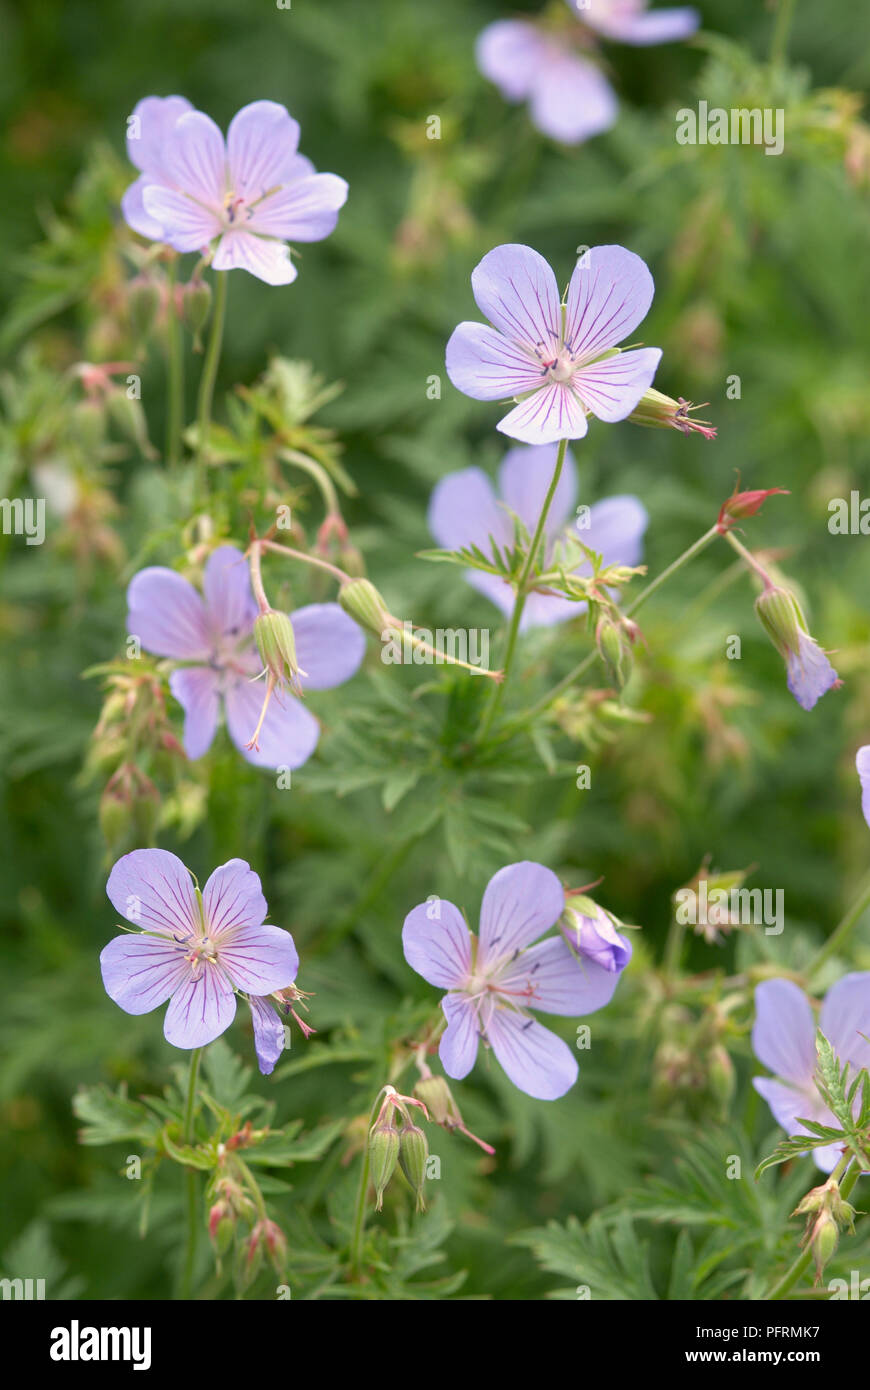 Geranium 'Blue Sunrise' (Cranesbill), with pale purple flowers and buds on long, thin stems, close-up Stock Photo